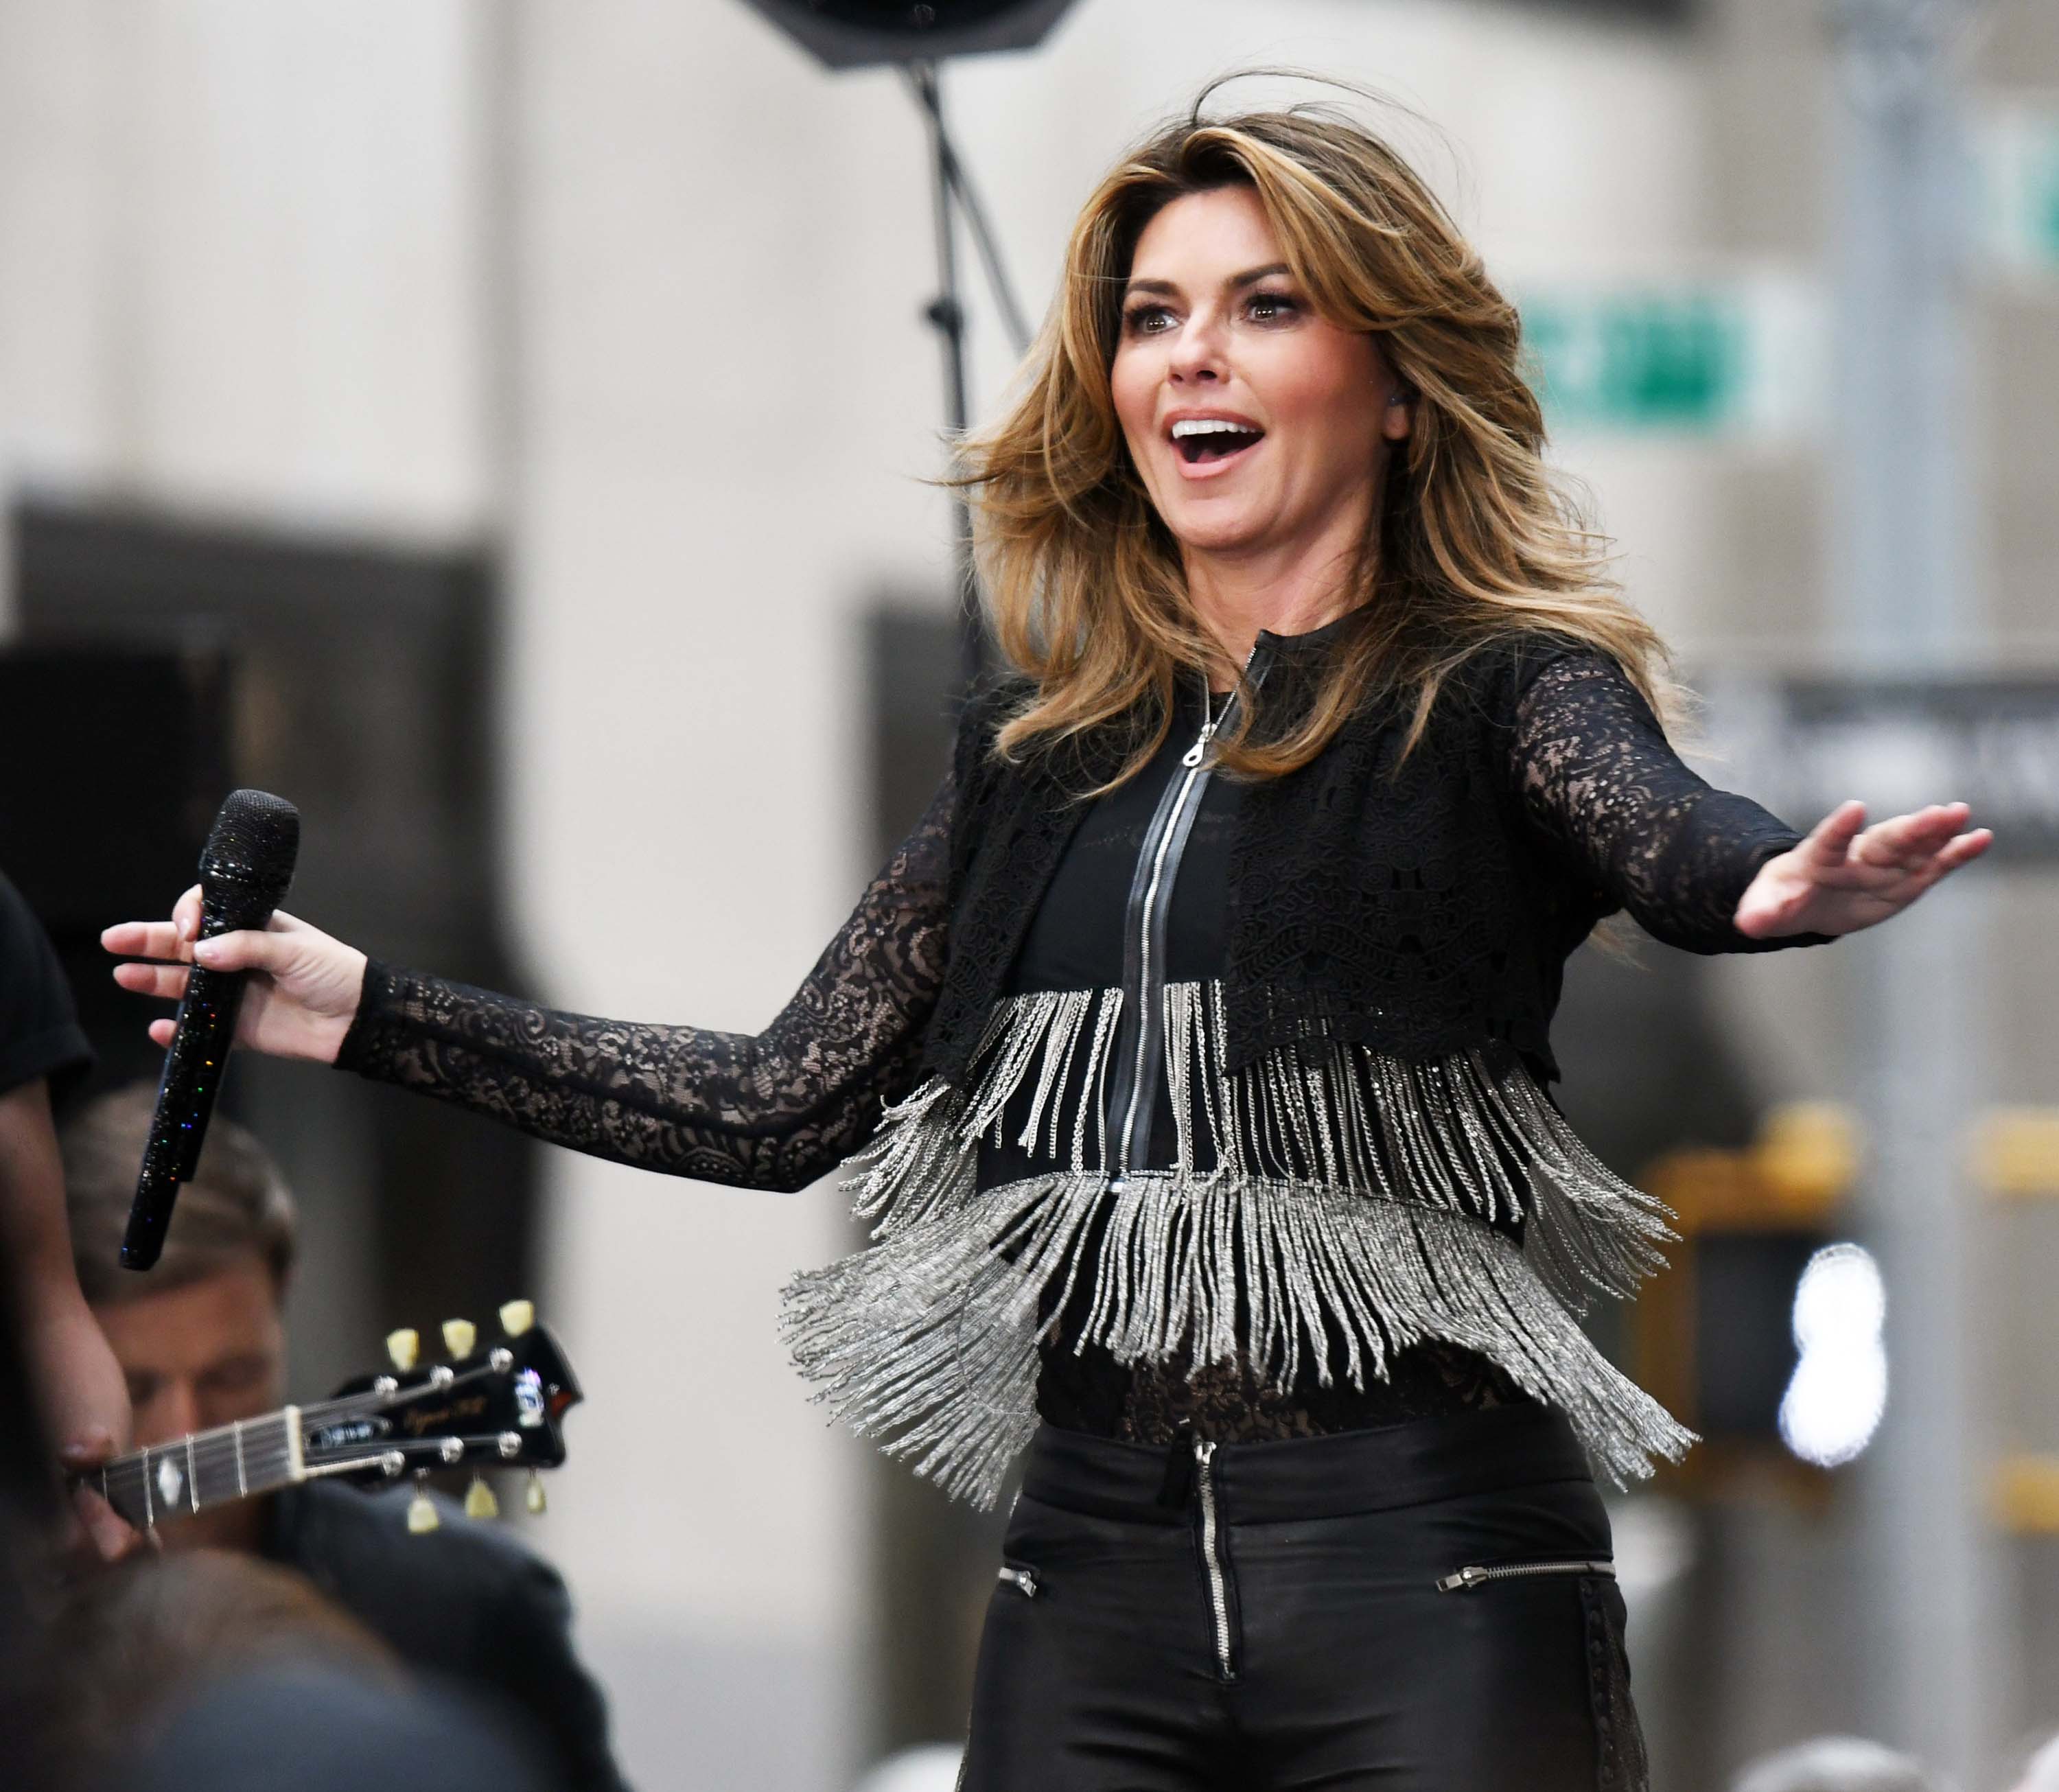 Shania Twain performs at Today show